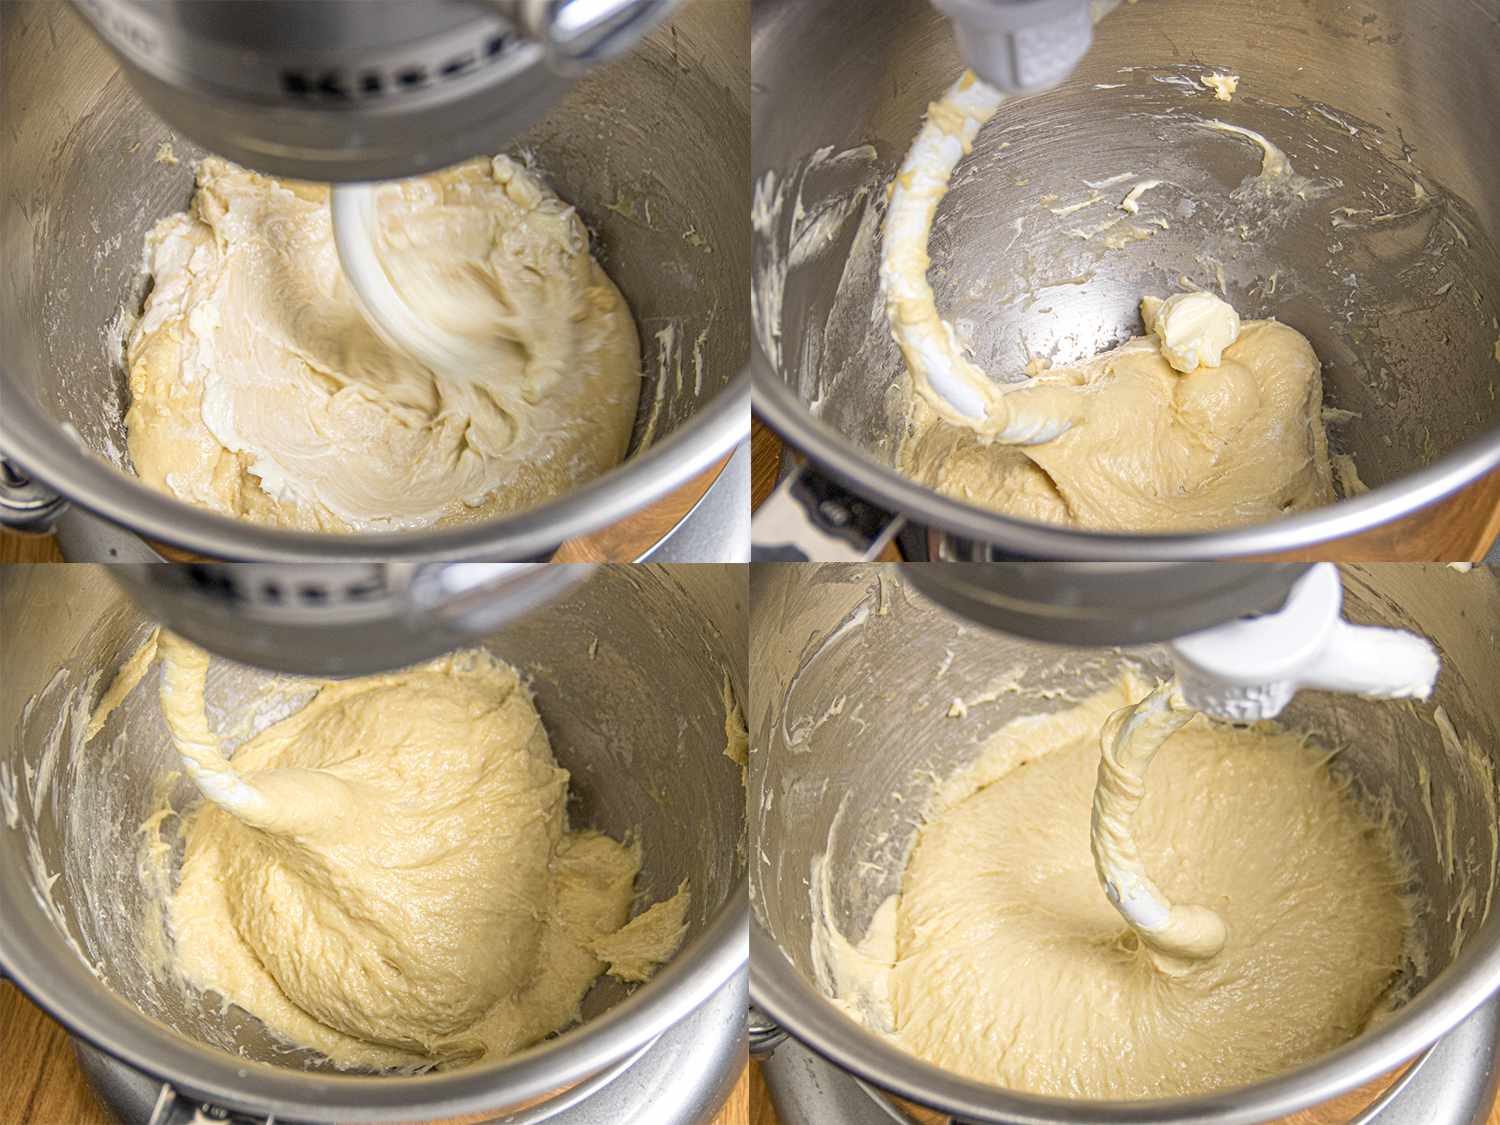 Four image collage of dough being mixed in a standmixer